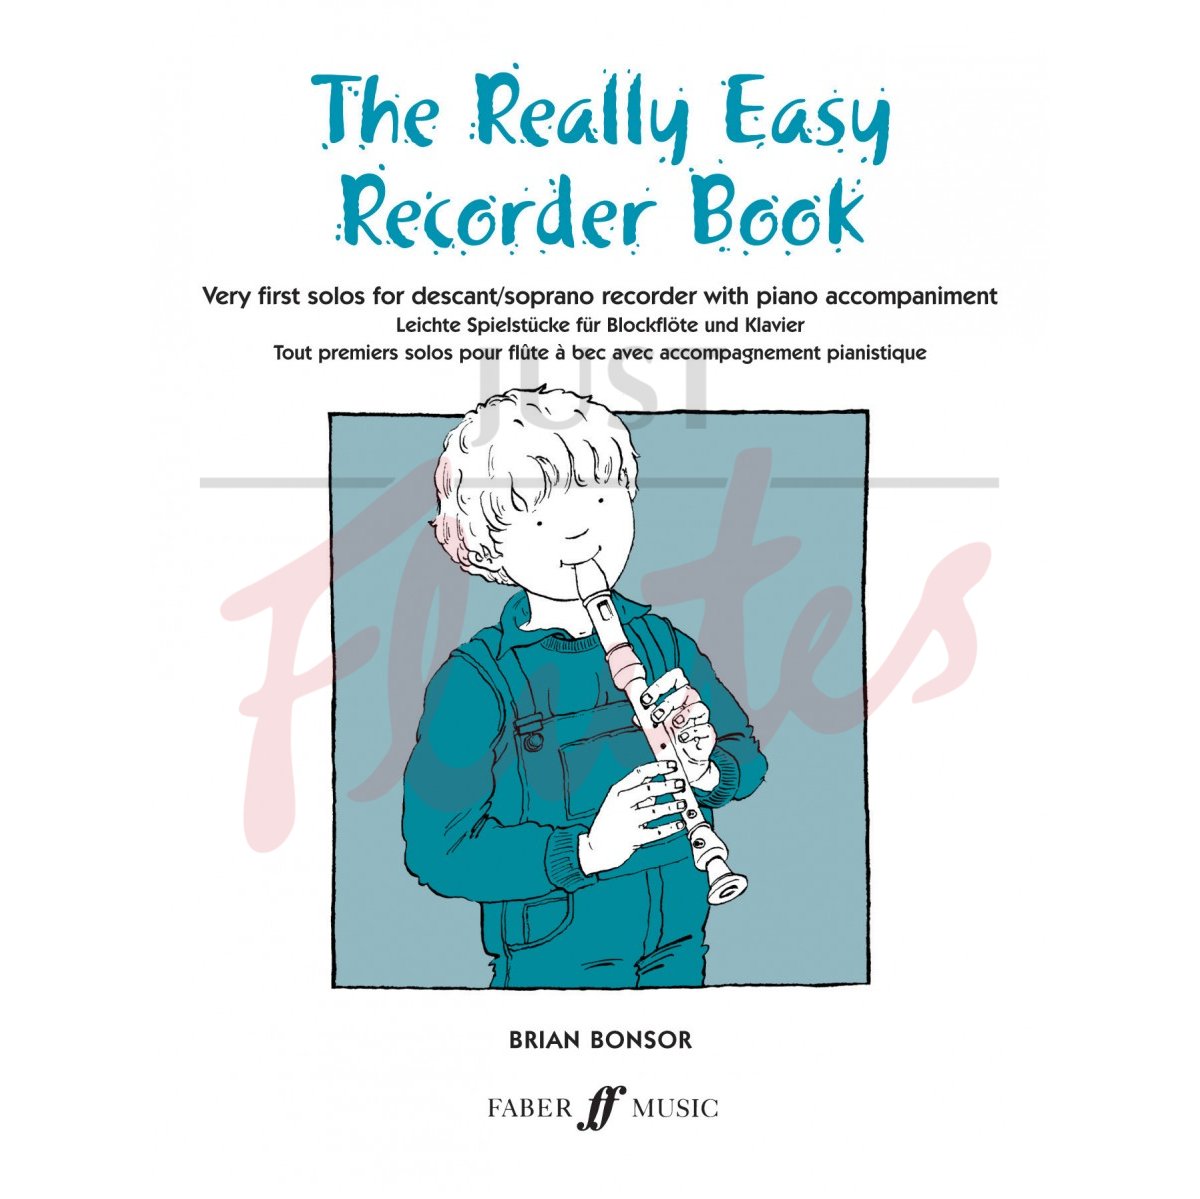 The Really Easy Recorder Book for Descant Recorder and Piano